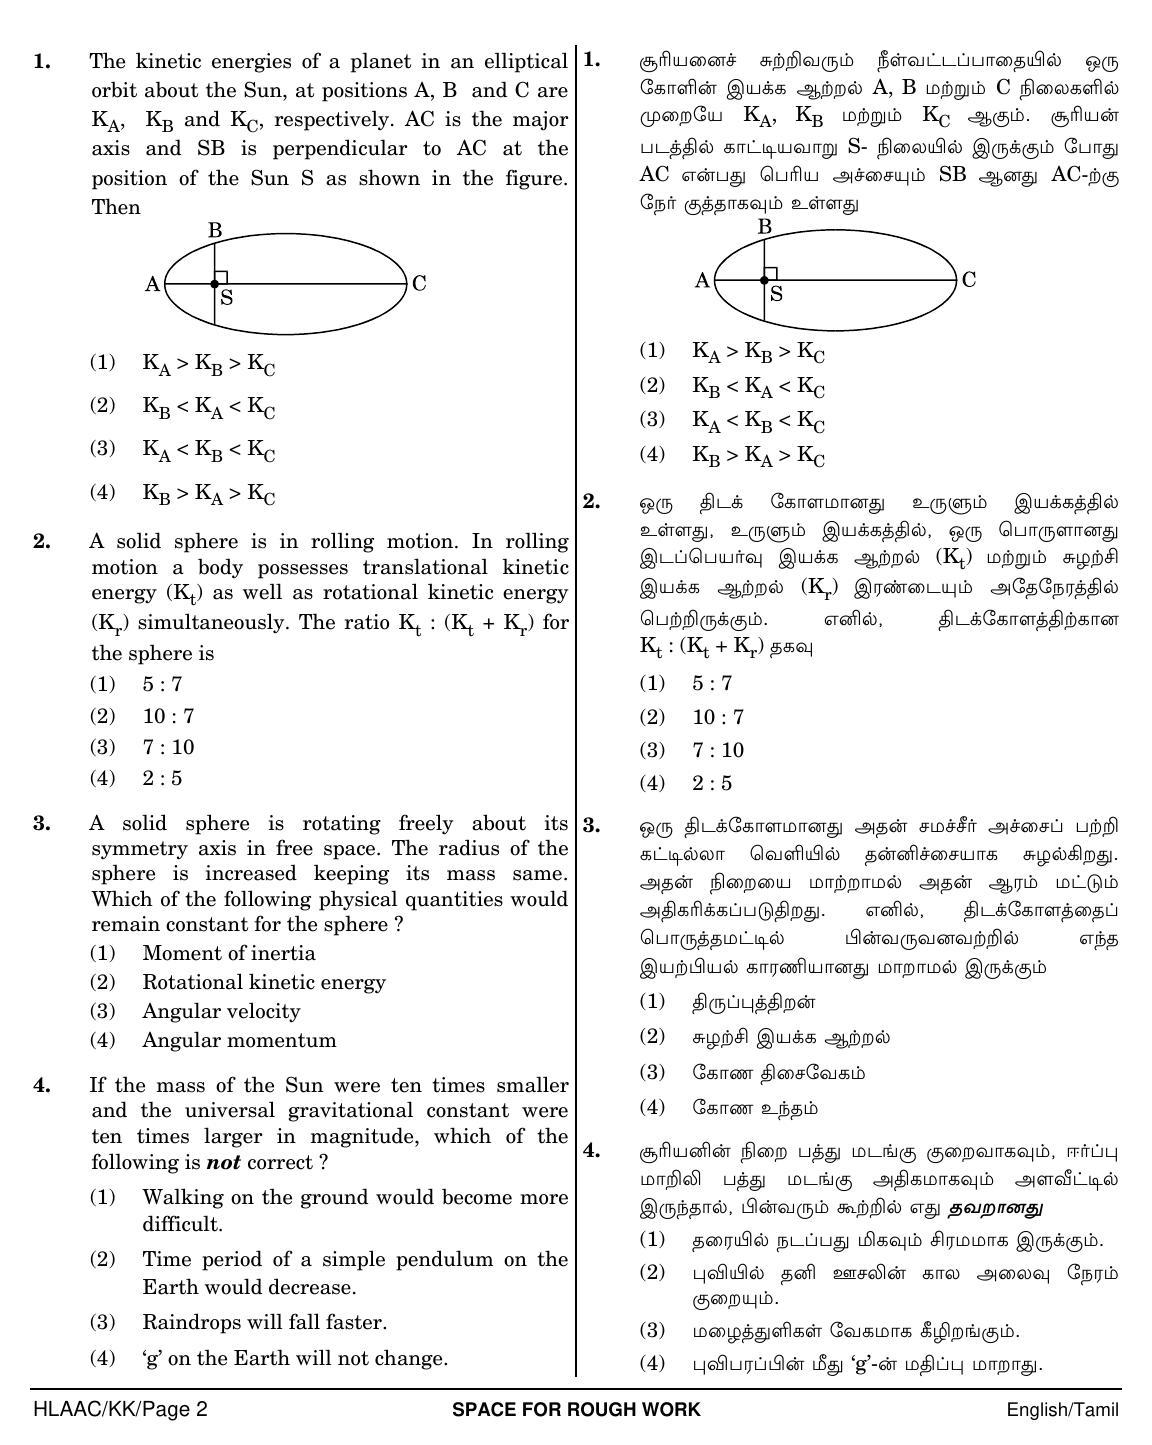 NEET Tamil KK 2018 Question Paper - Page 2